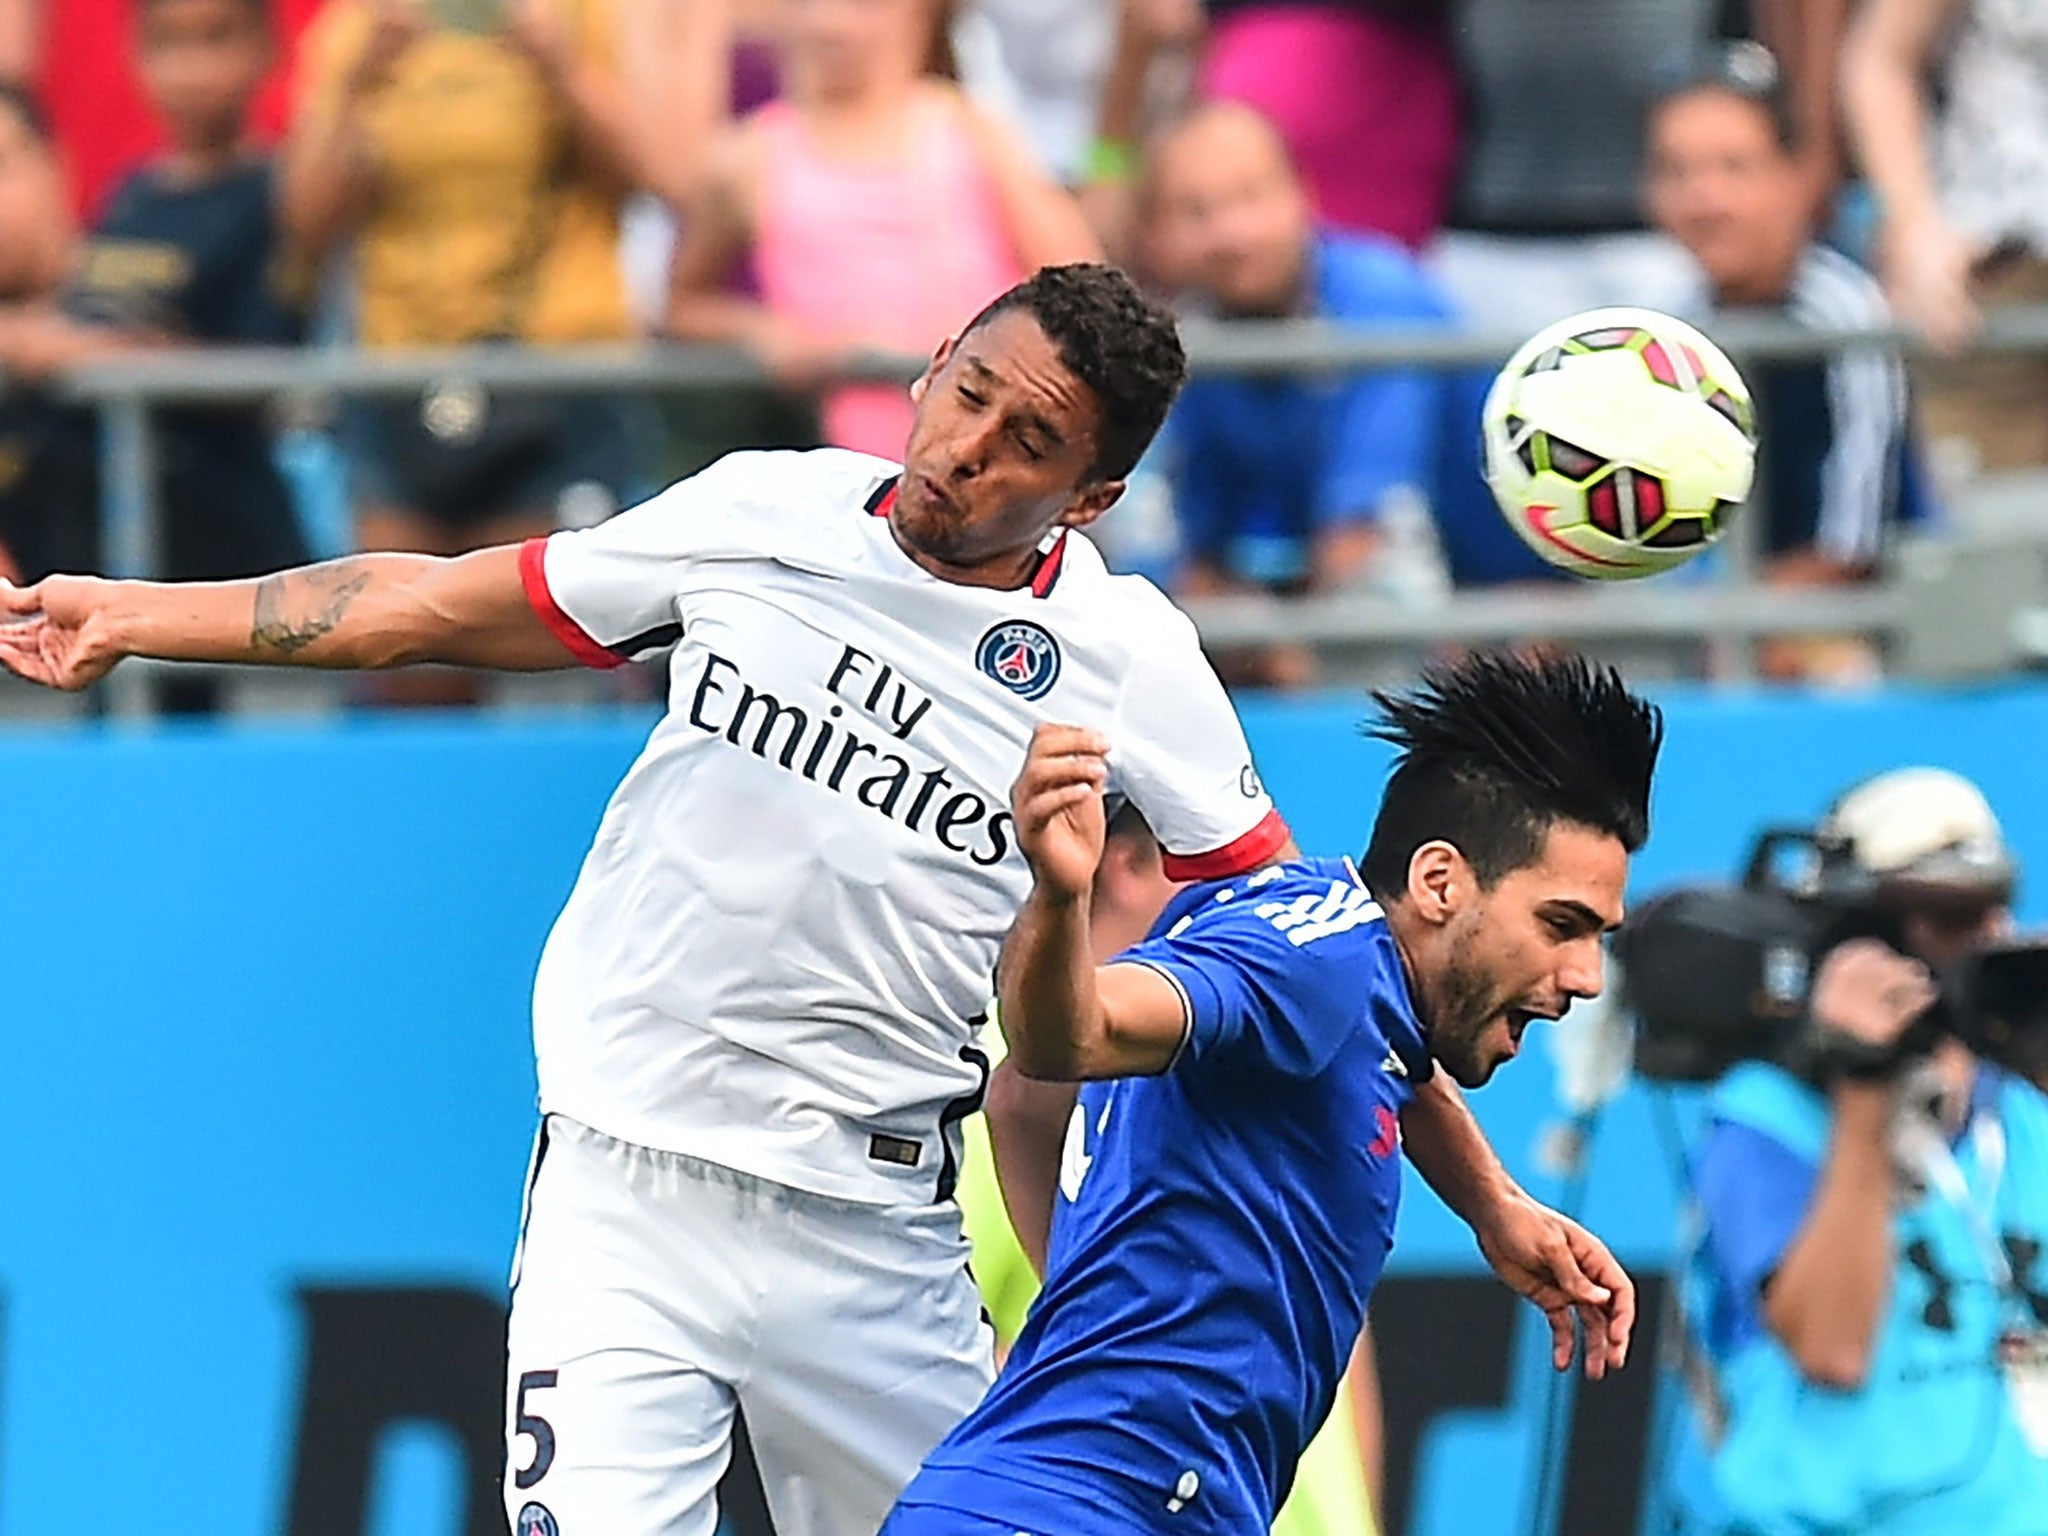 Radamel Falcao (right) challenges for the ball on his Chelsea debut against PSG last week